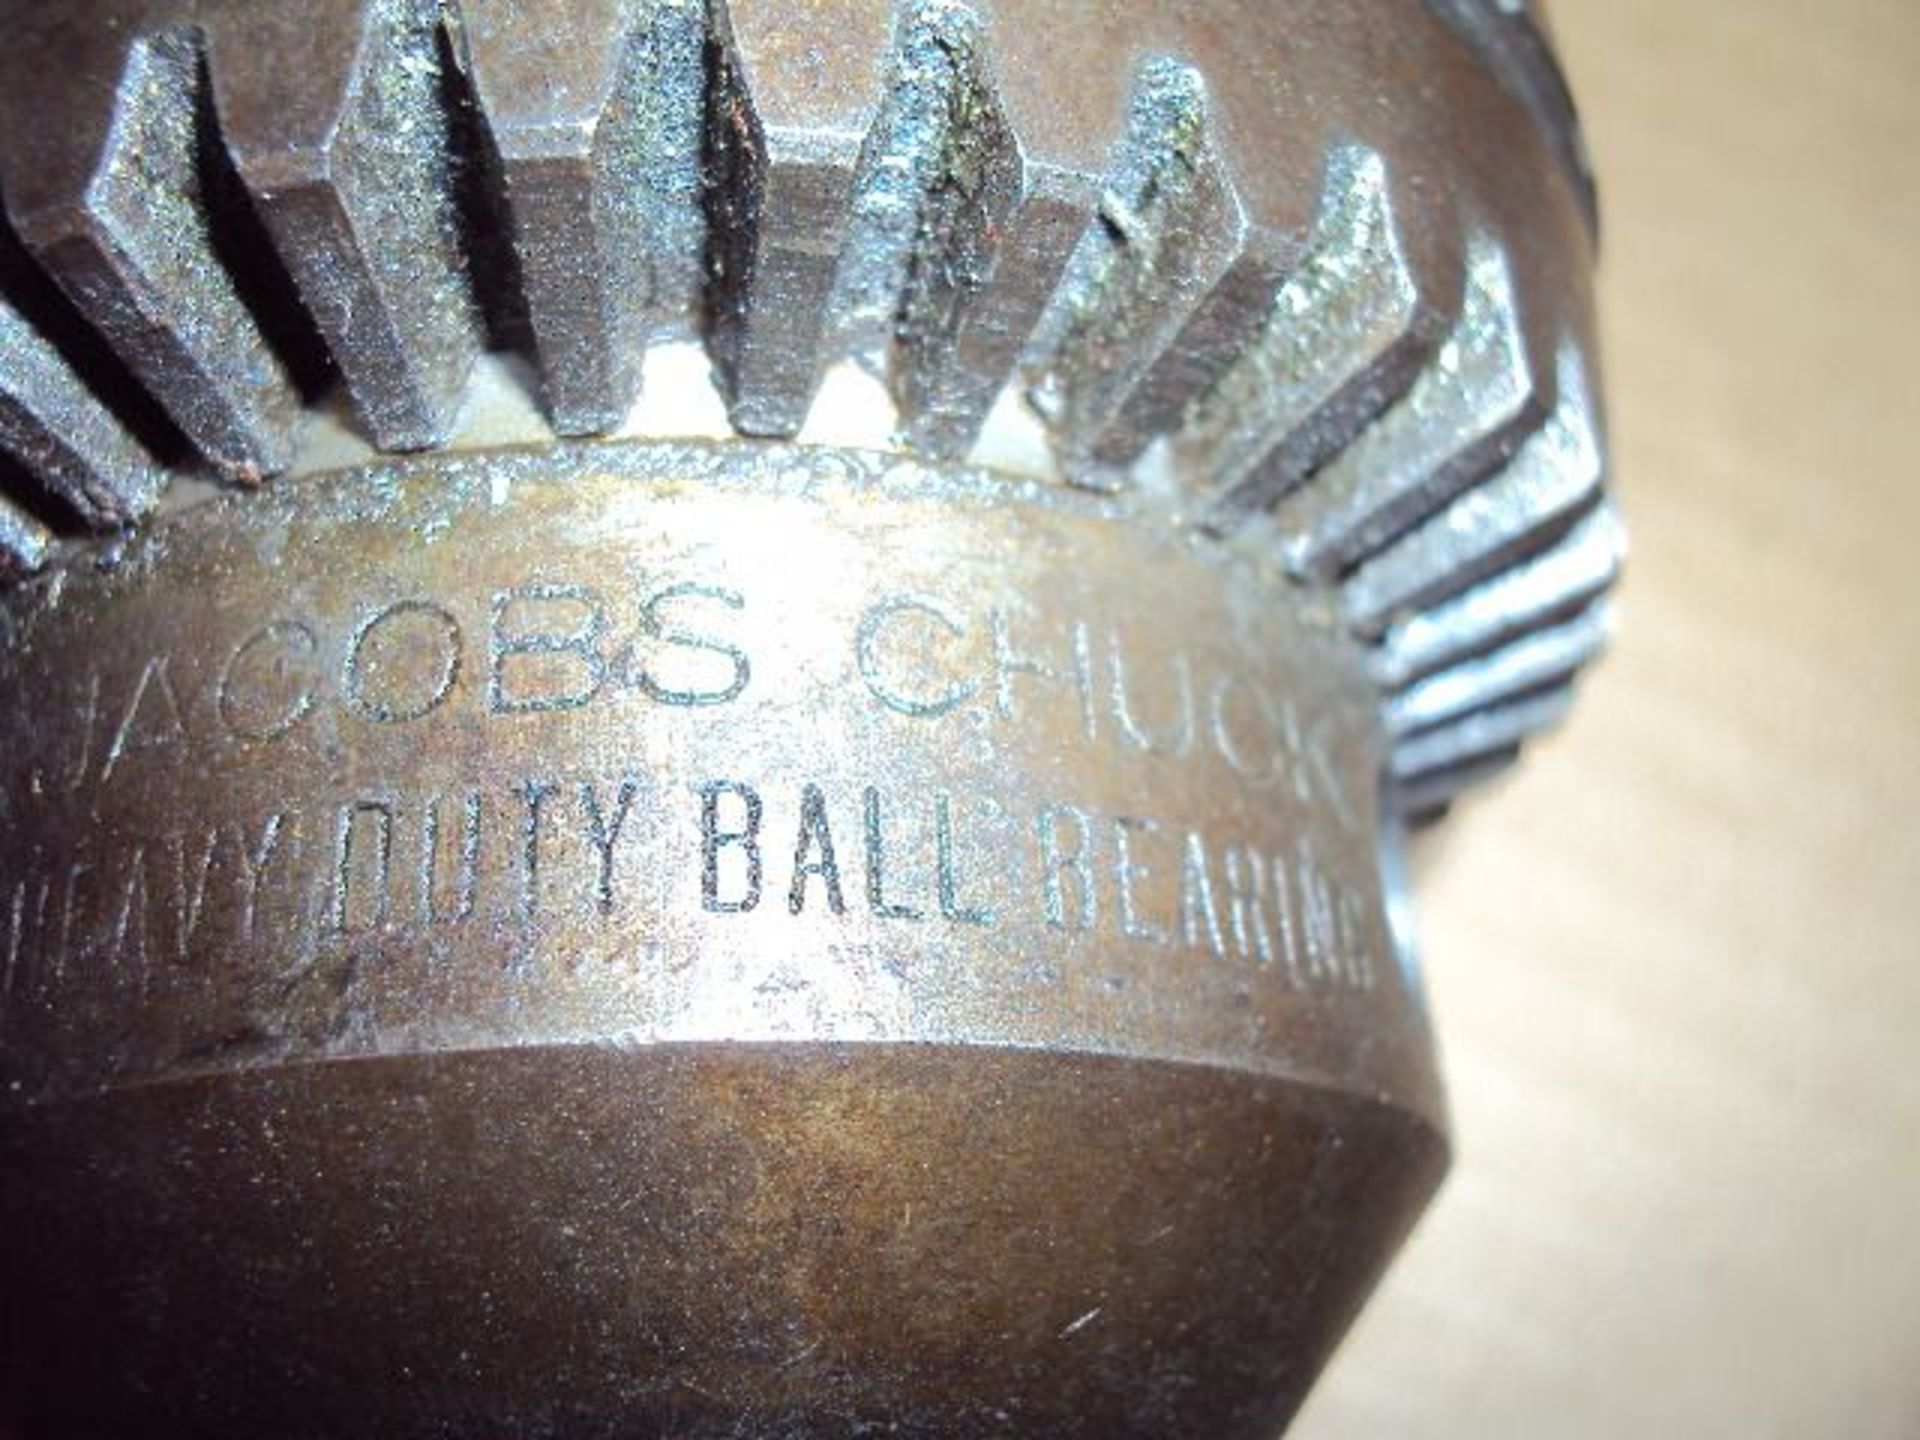 Jacobs No. 20N Super Ball Bearing Drill Chuck with Jacobs MT5 Shank - Image 4 of 6